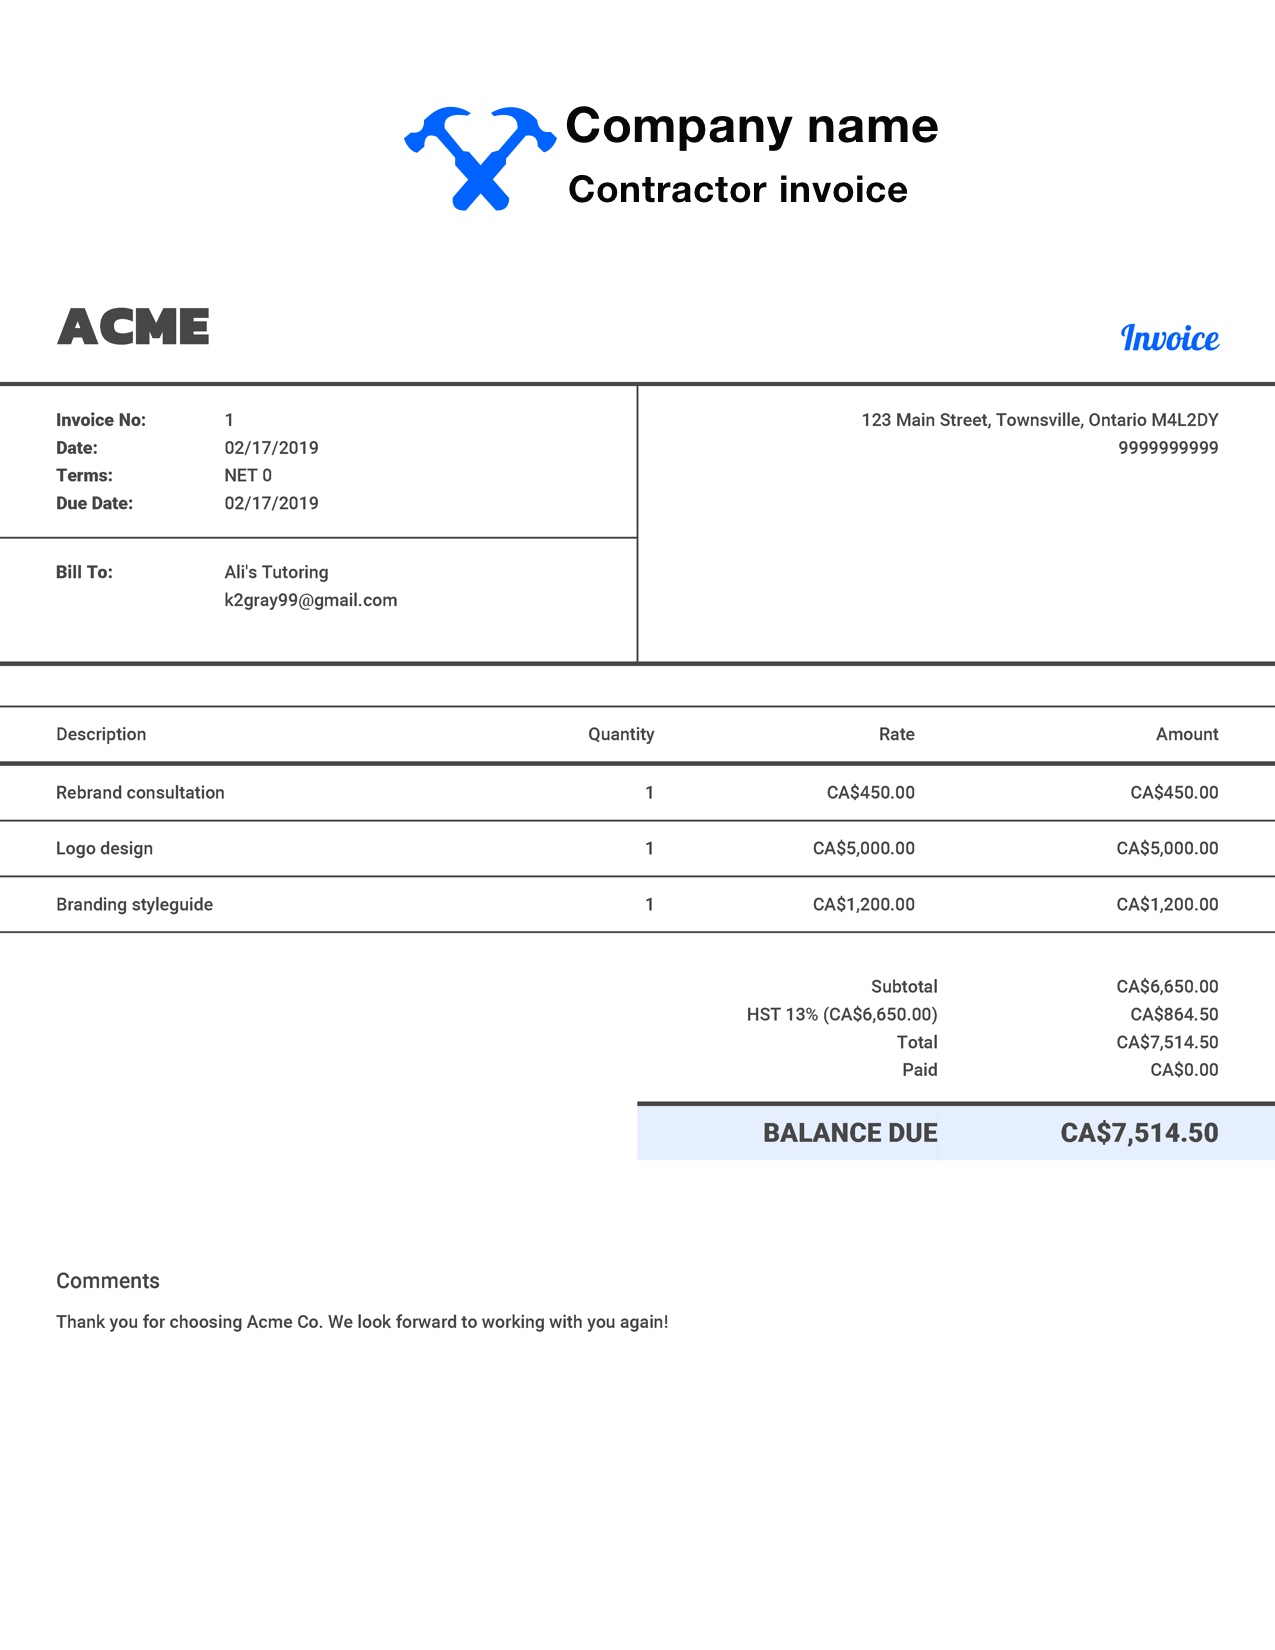 contractor invoice template free